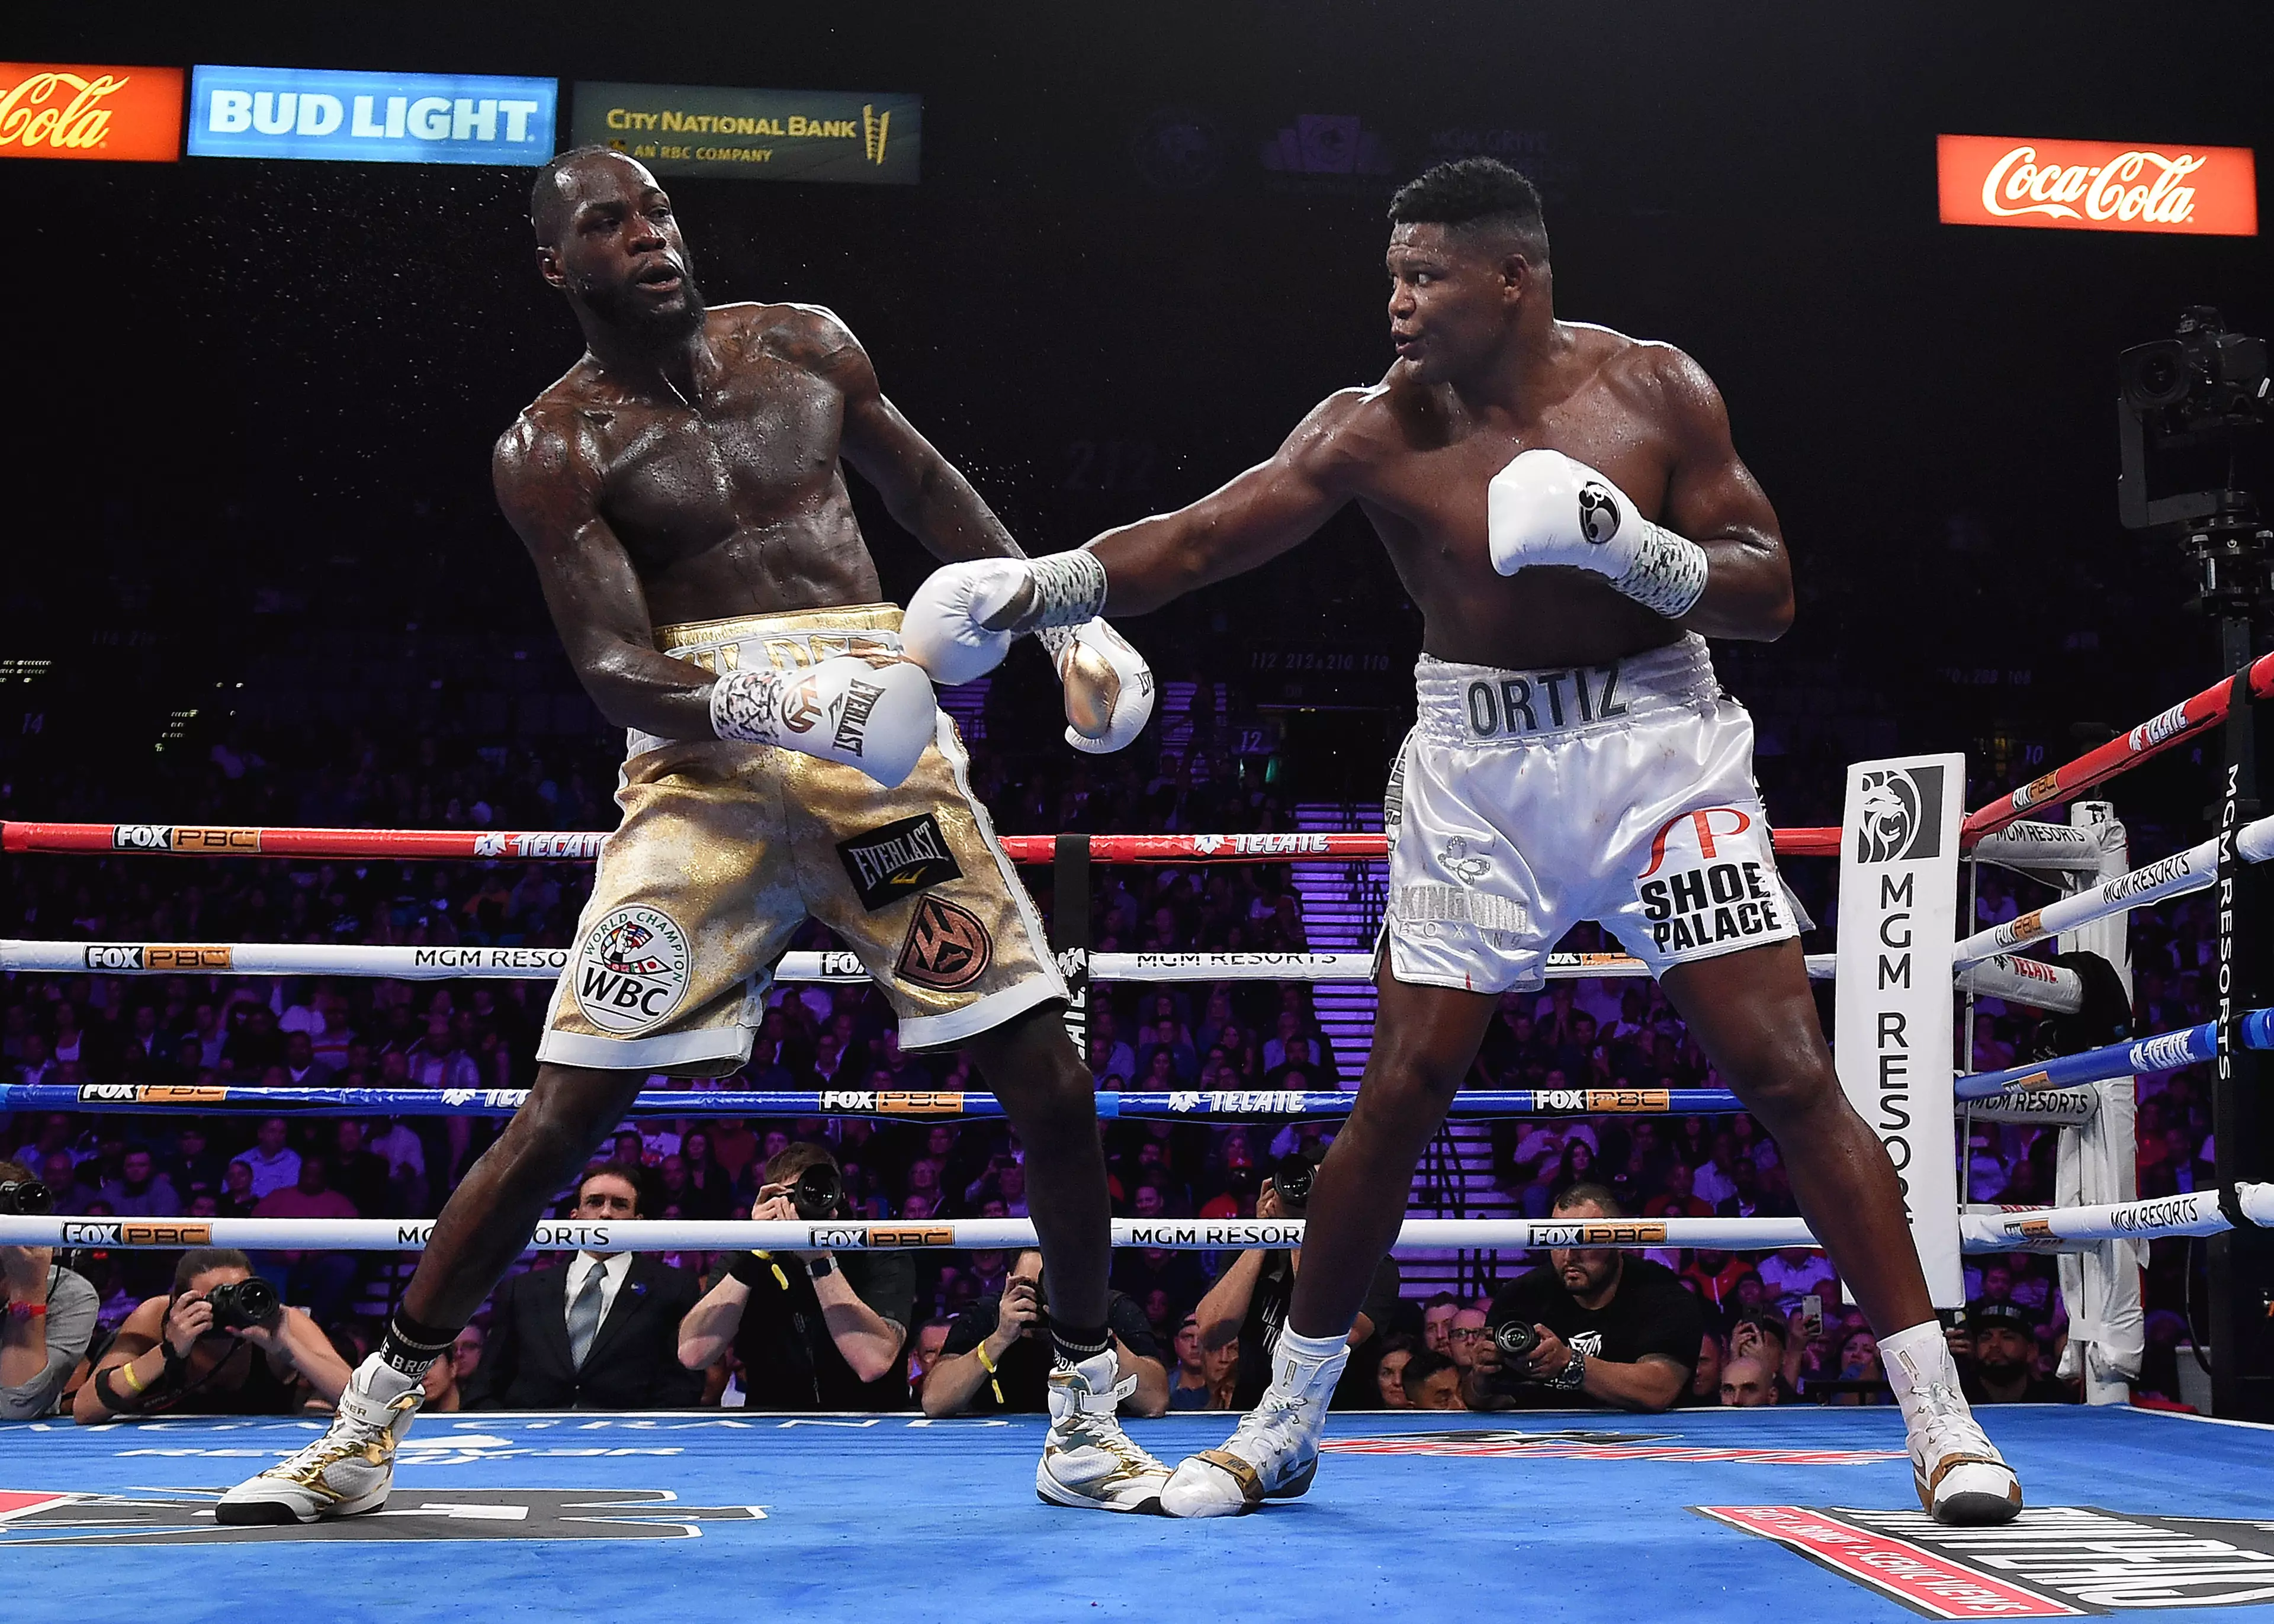 Ortiz was Wilder's previous challenger. Image: PA Images